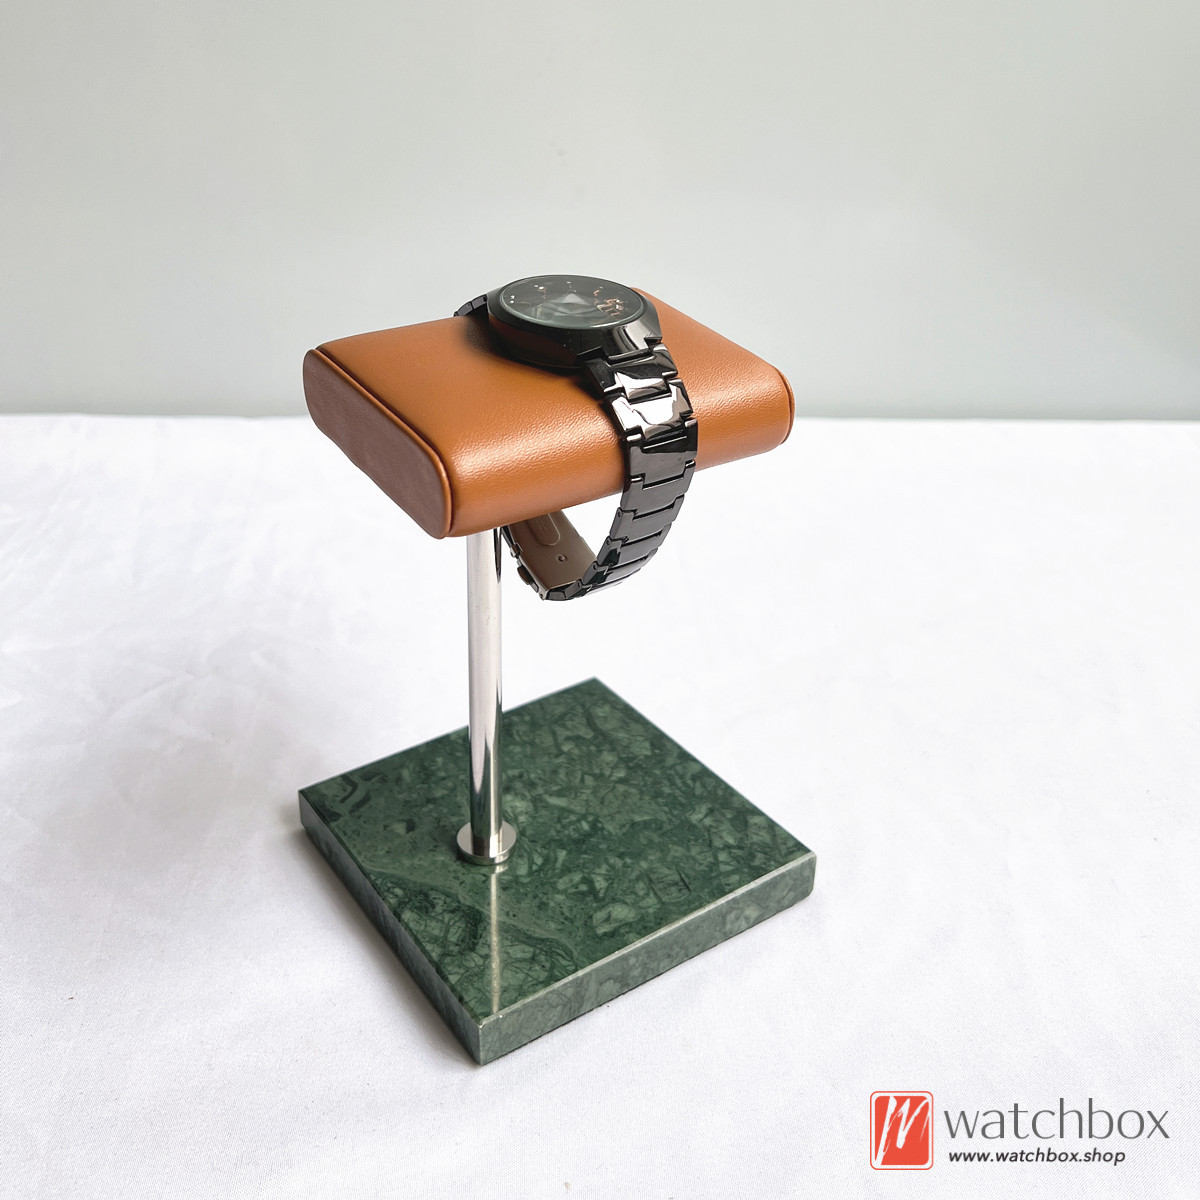 The Green Square Marble Base PU Leather Watch Jewelry Case Holder Counter Display Stand